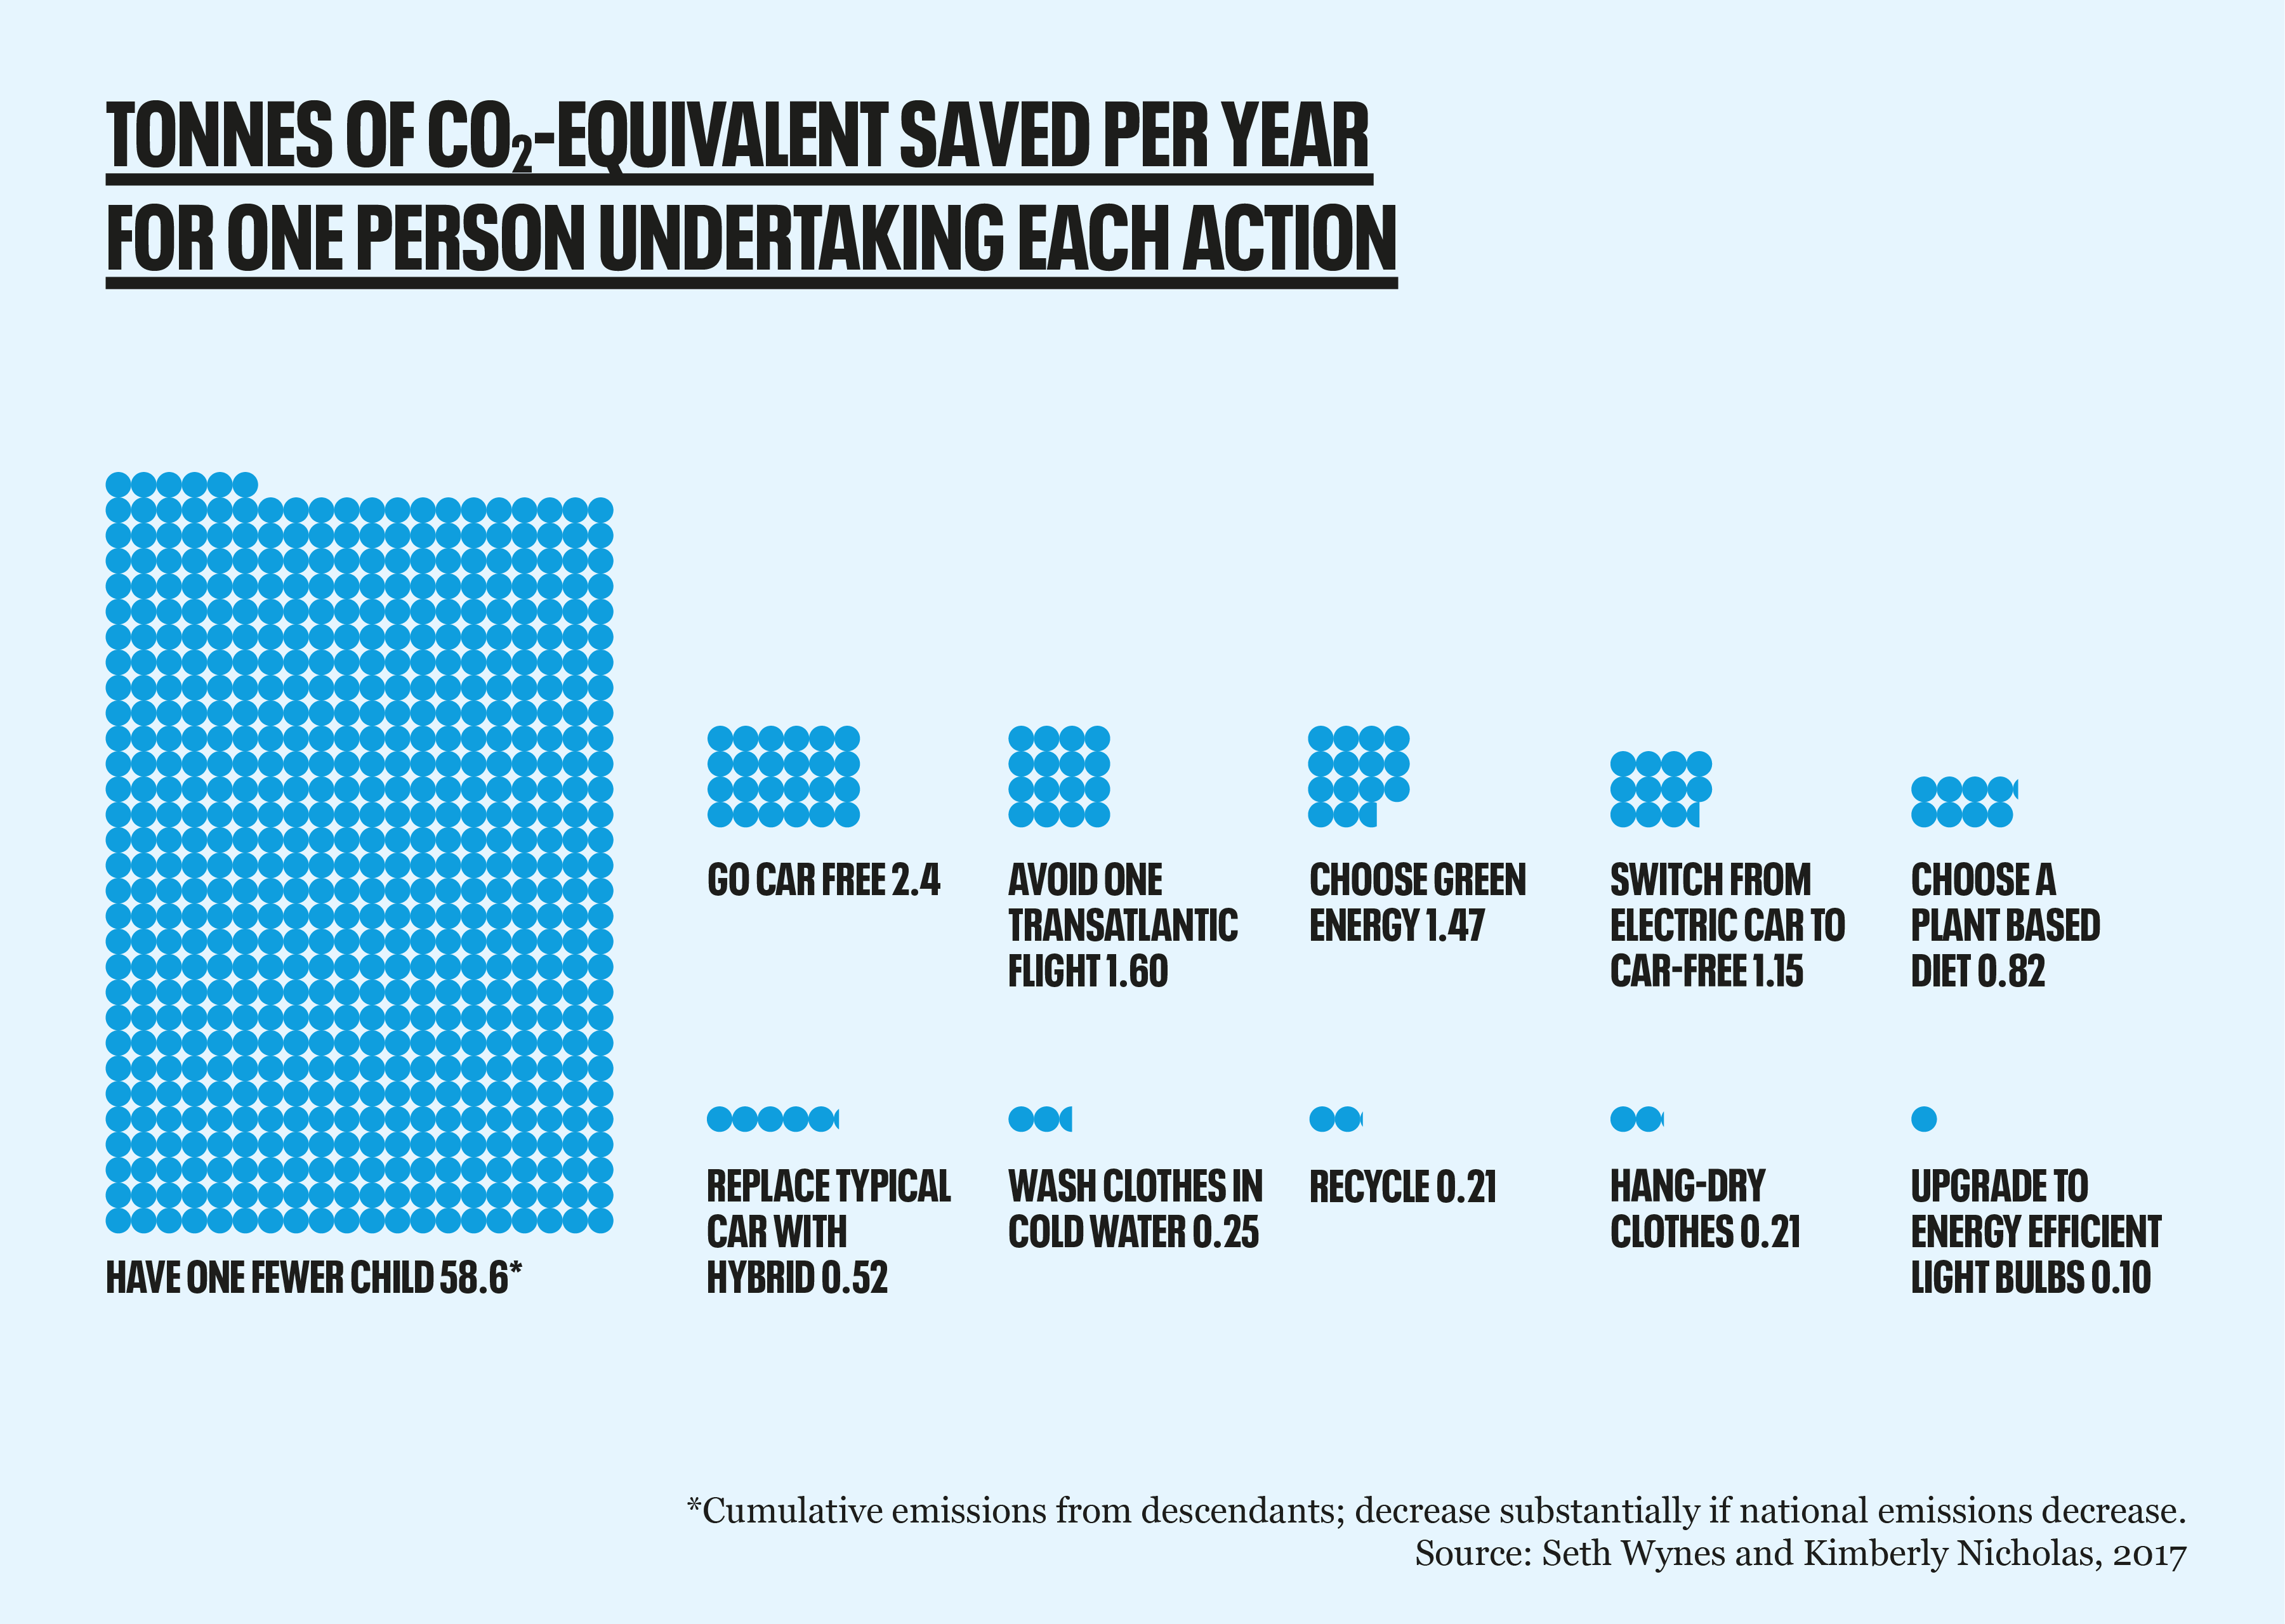 Tonnes of CO2 saved through environmental actions